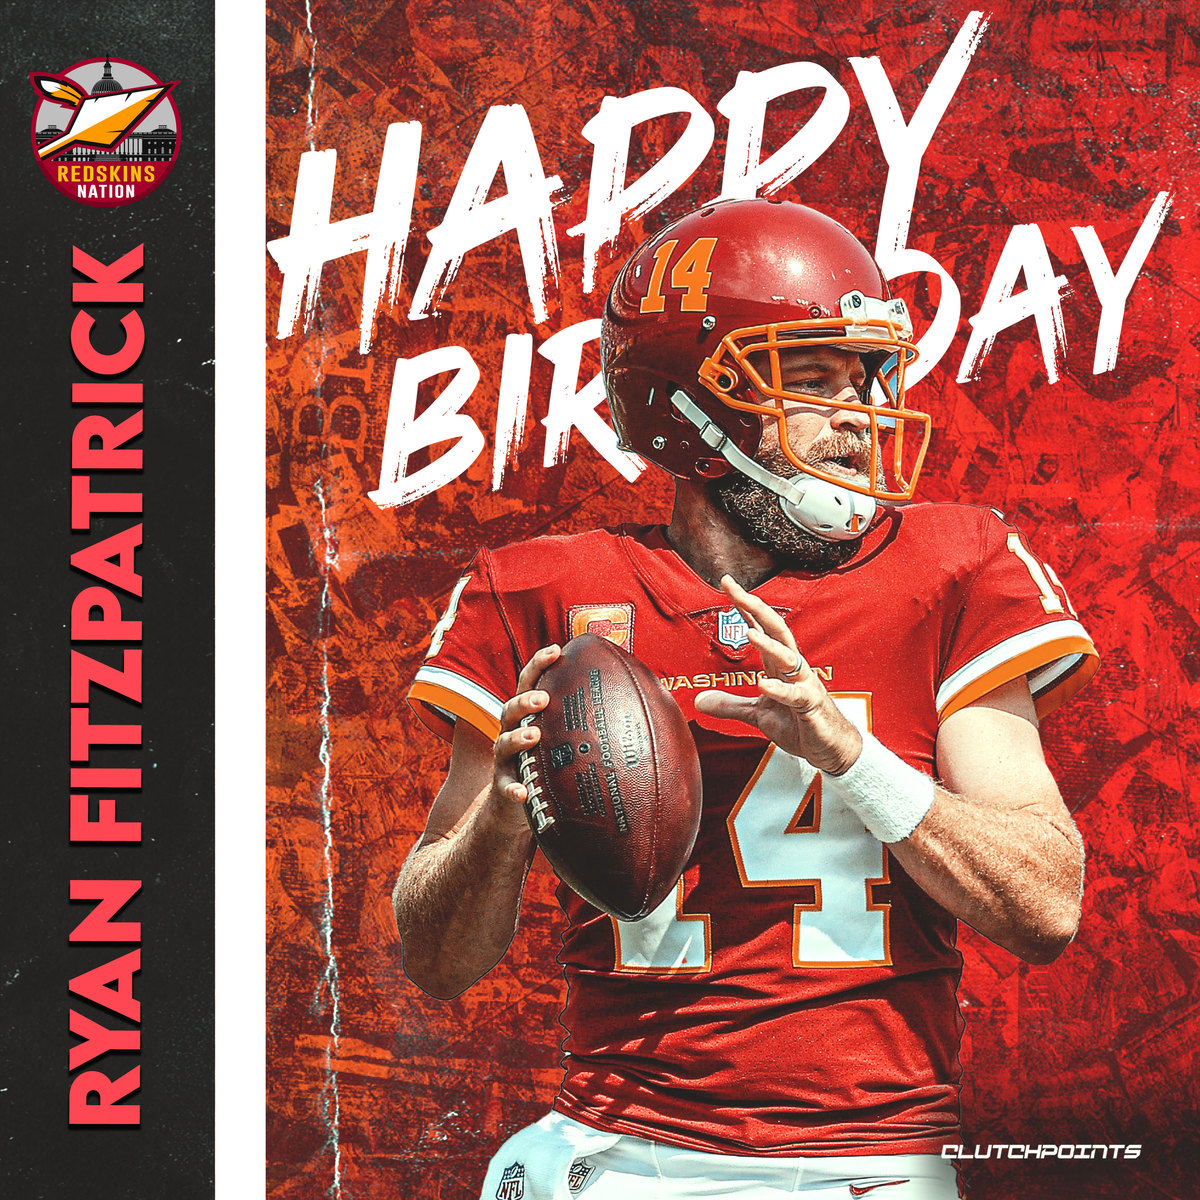 Join Redskins Nation in greeting Ryan Fitzpatrick a happy 39th birthday! 